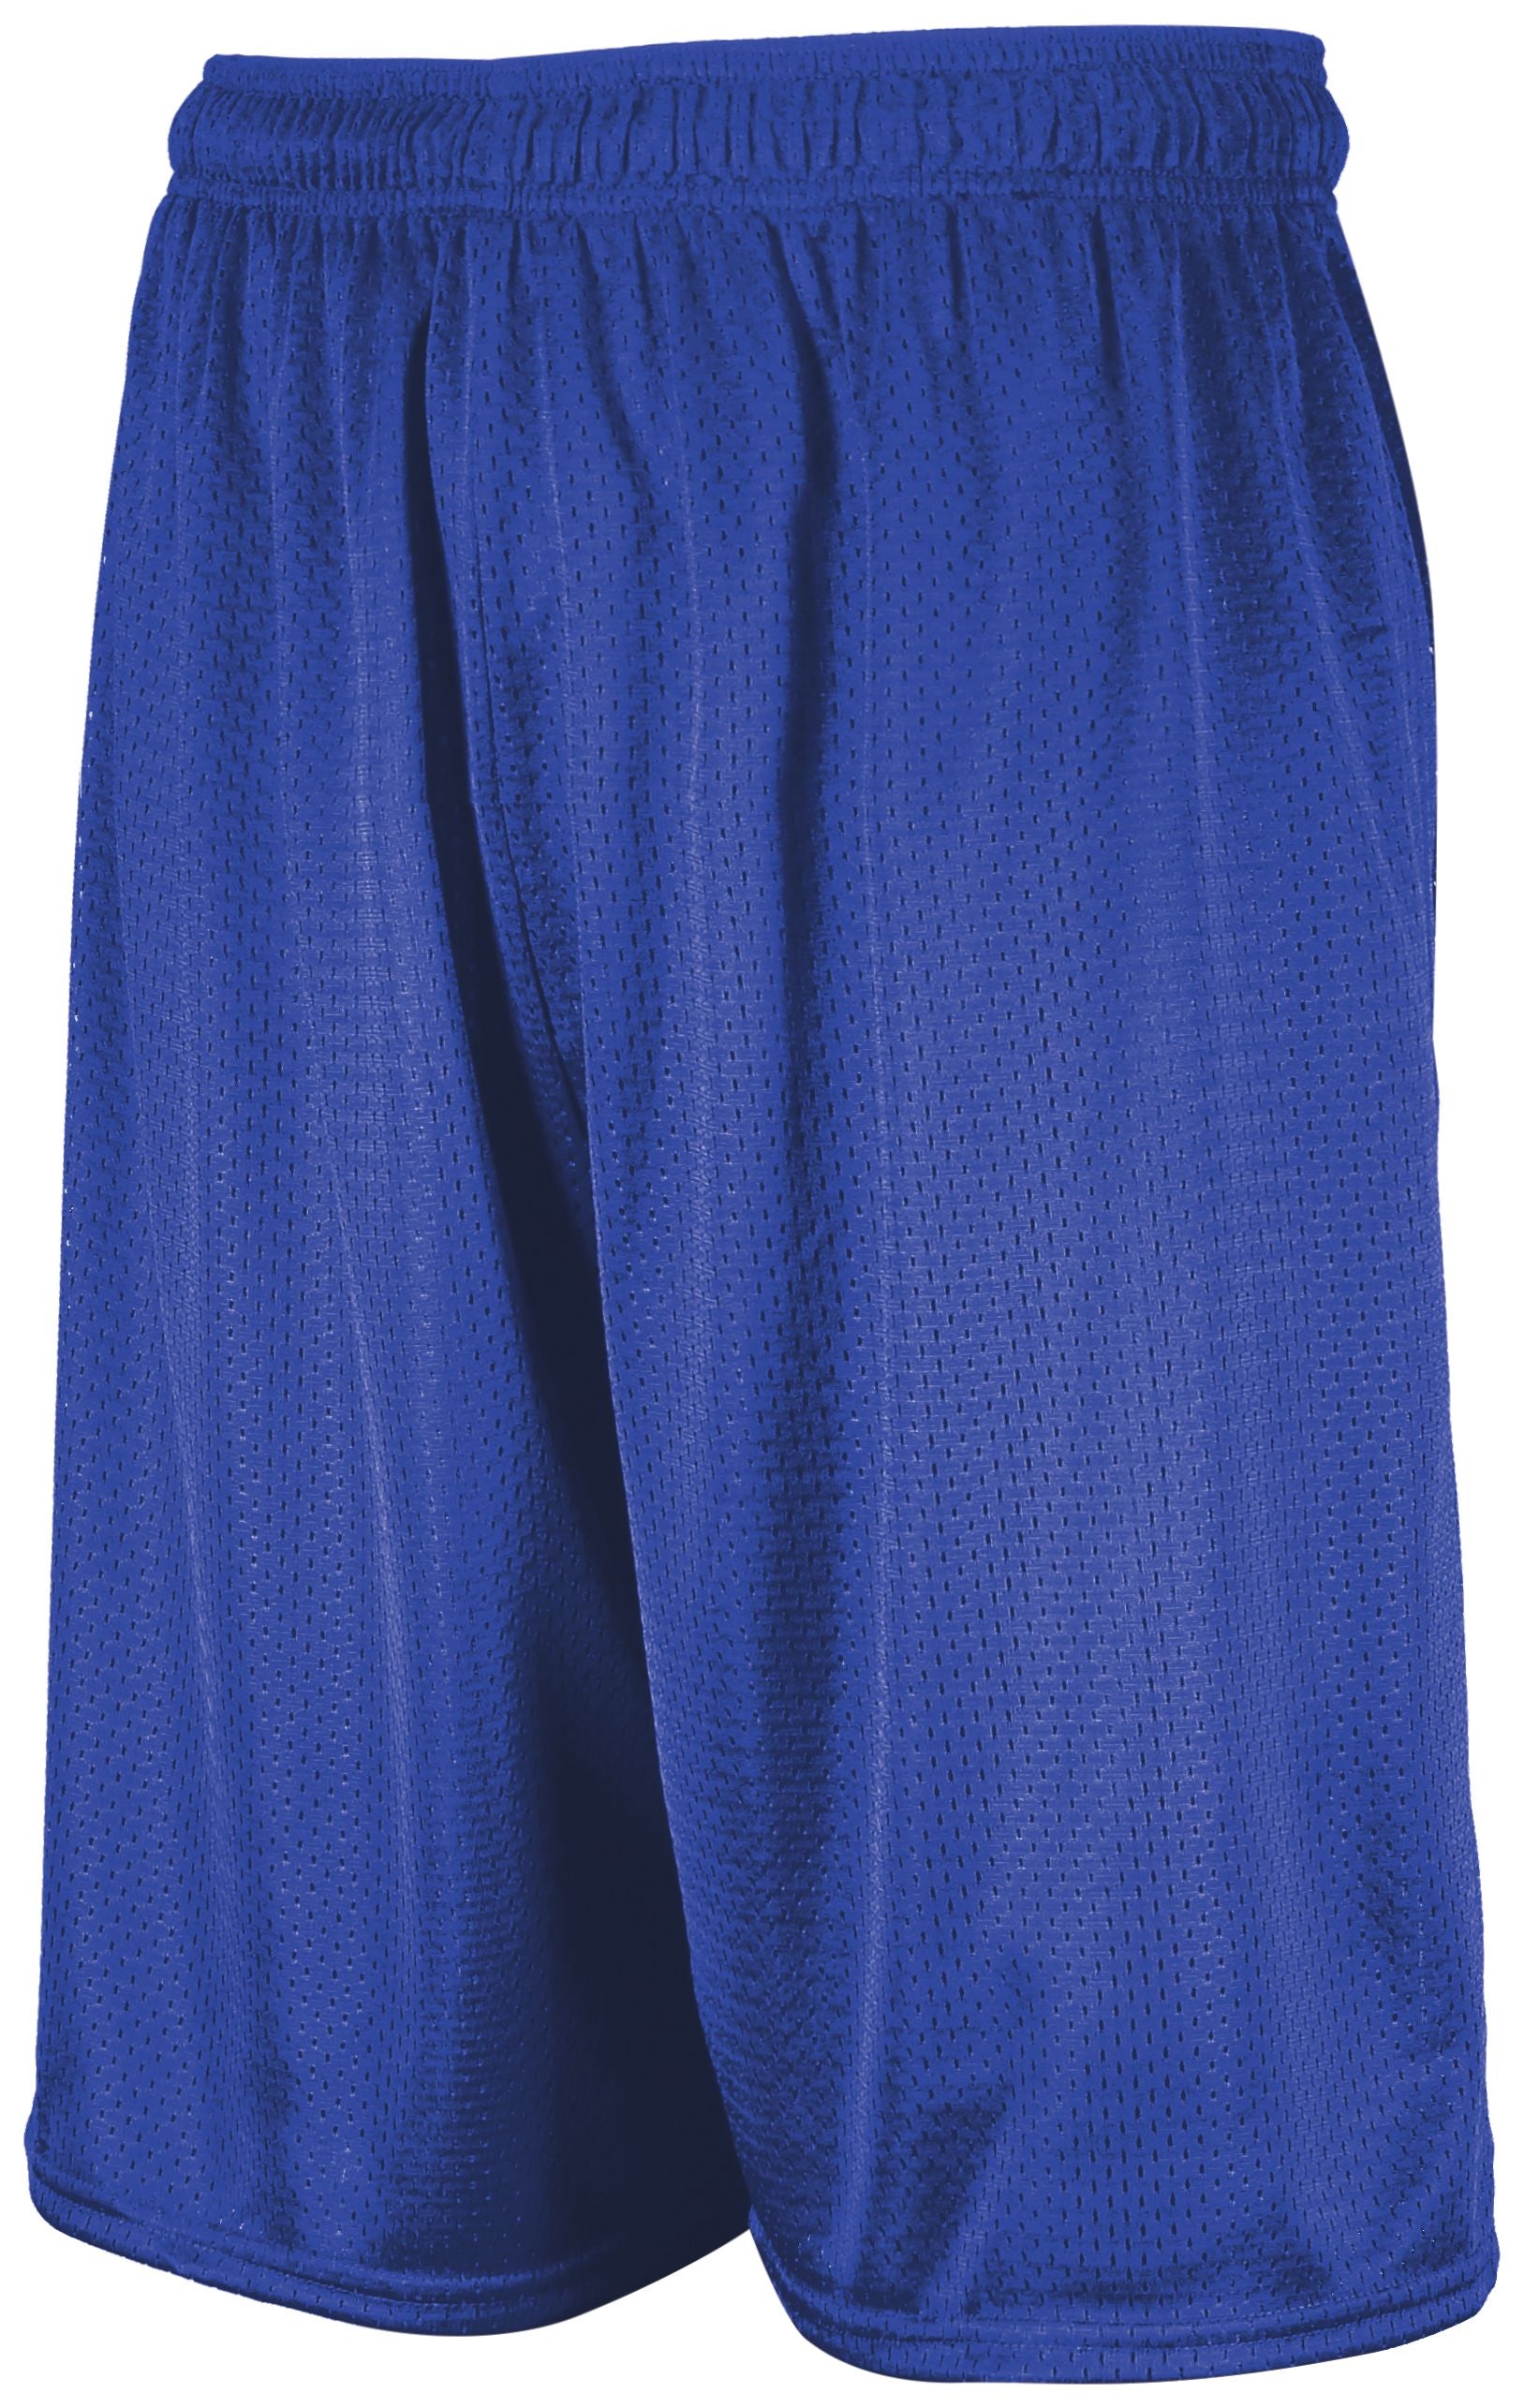 Russell Athletic Youth Dri-Power Mesh Shorts in Royal  -Part of the Youth, Youth-Shorts, Russell-Athletic-Products product lines at KanaleyCreations.com